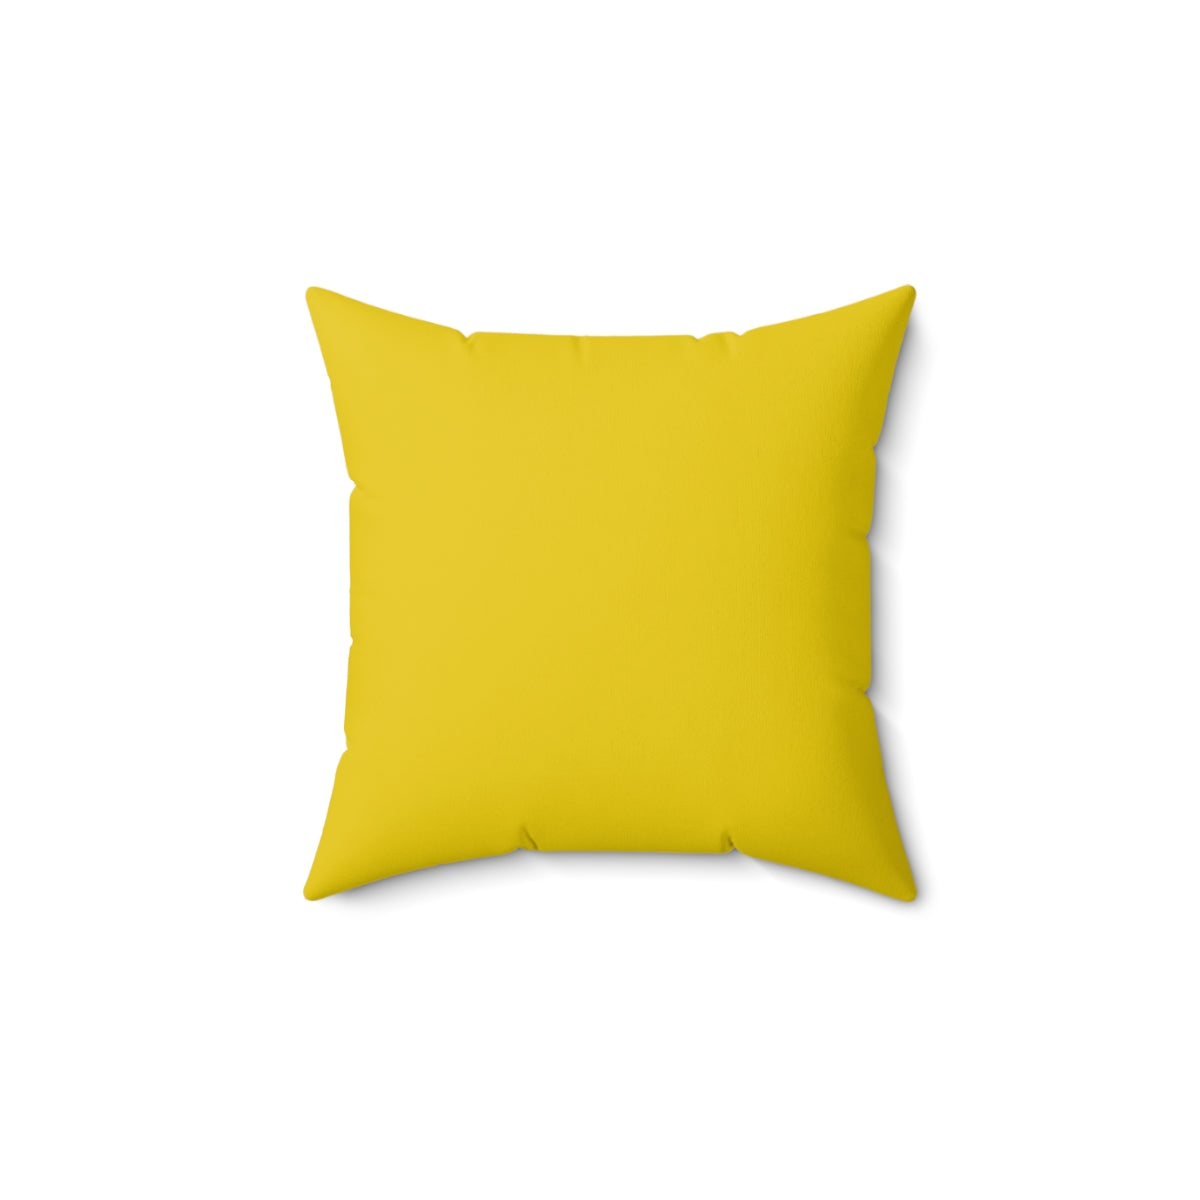 Affirmative “Want” Square Pillow